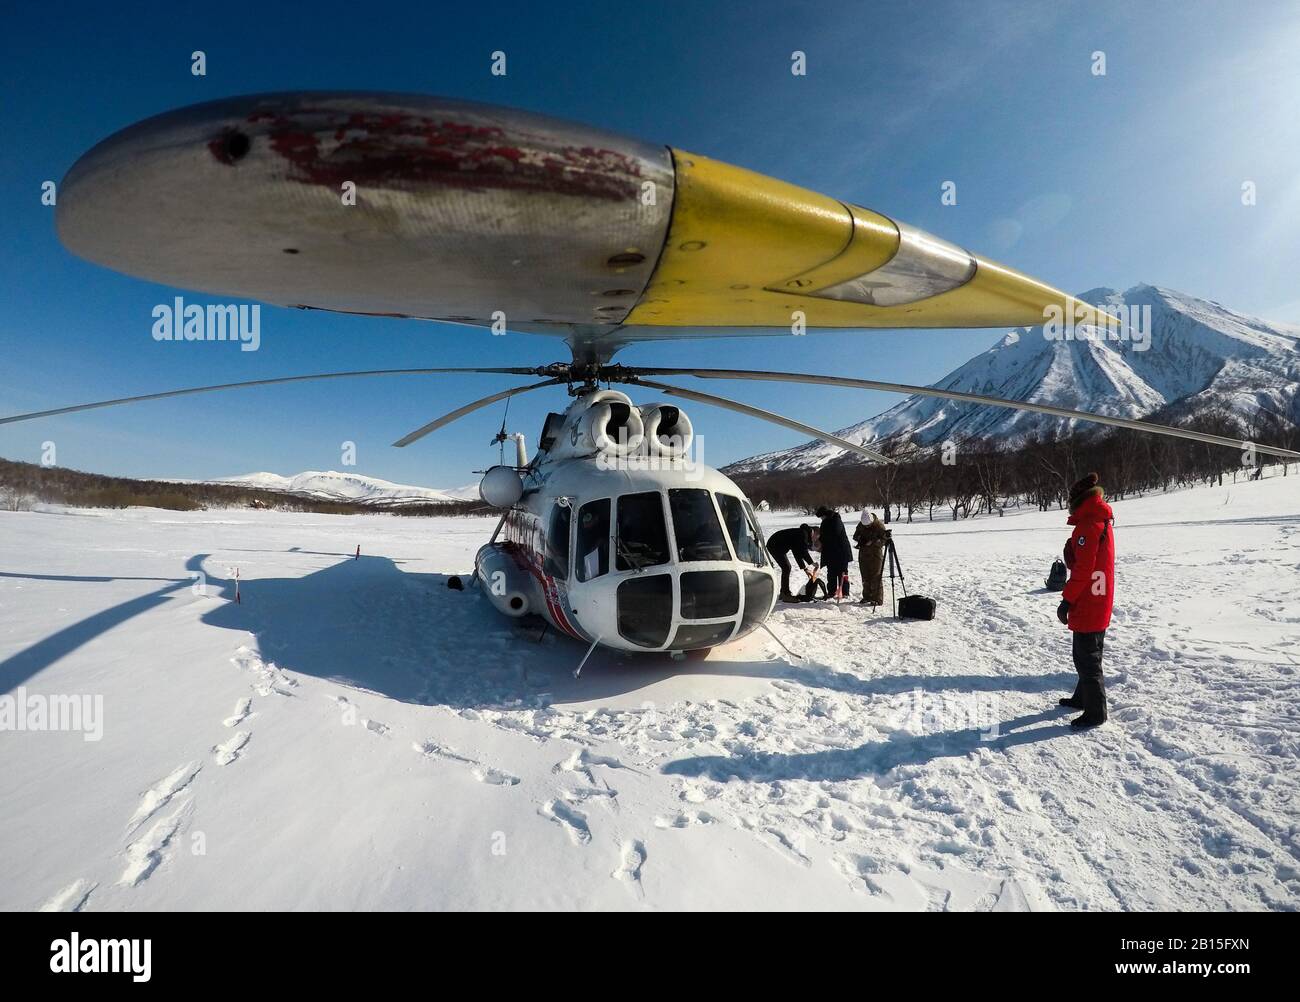 Kamchatka Territory Russia February 23 2020 A Mil Mi 8 Helicopter Operated By The Vityaz Aero Air Carrier Taking Off From The Nikolayevka Airfield Yuri Smityuk Tass Stock Photo Alamy